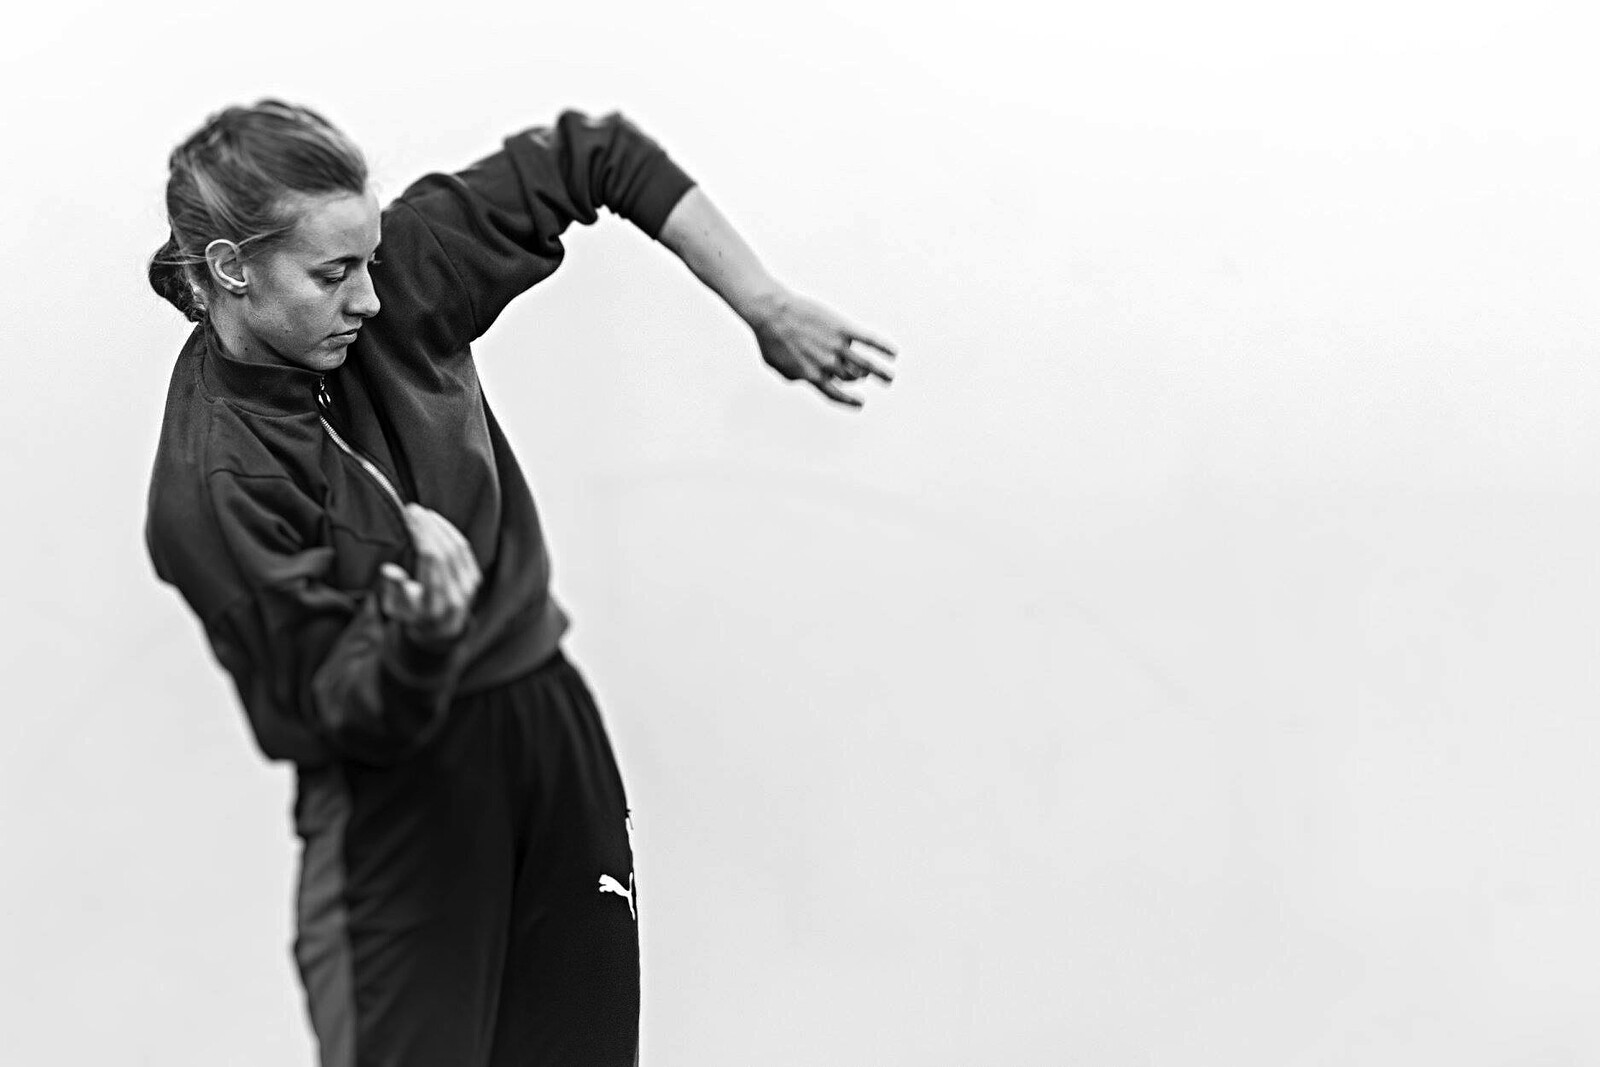 GATHER UP: Morning Class with Anna Kaszuba at Bristol Old Vic